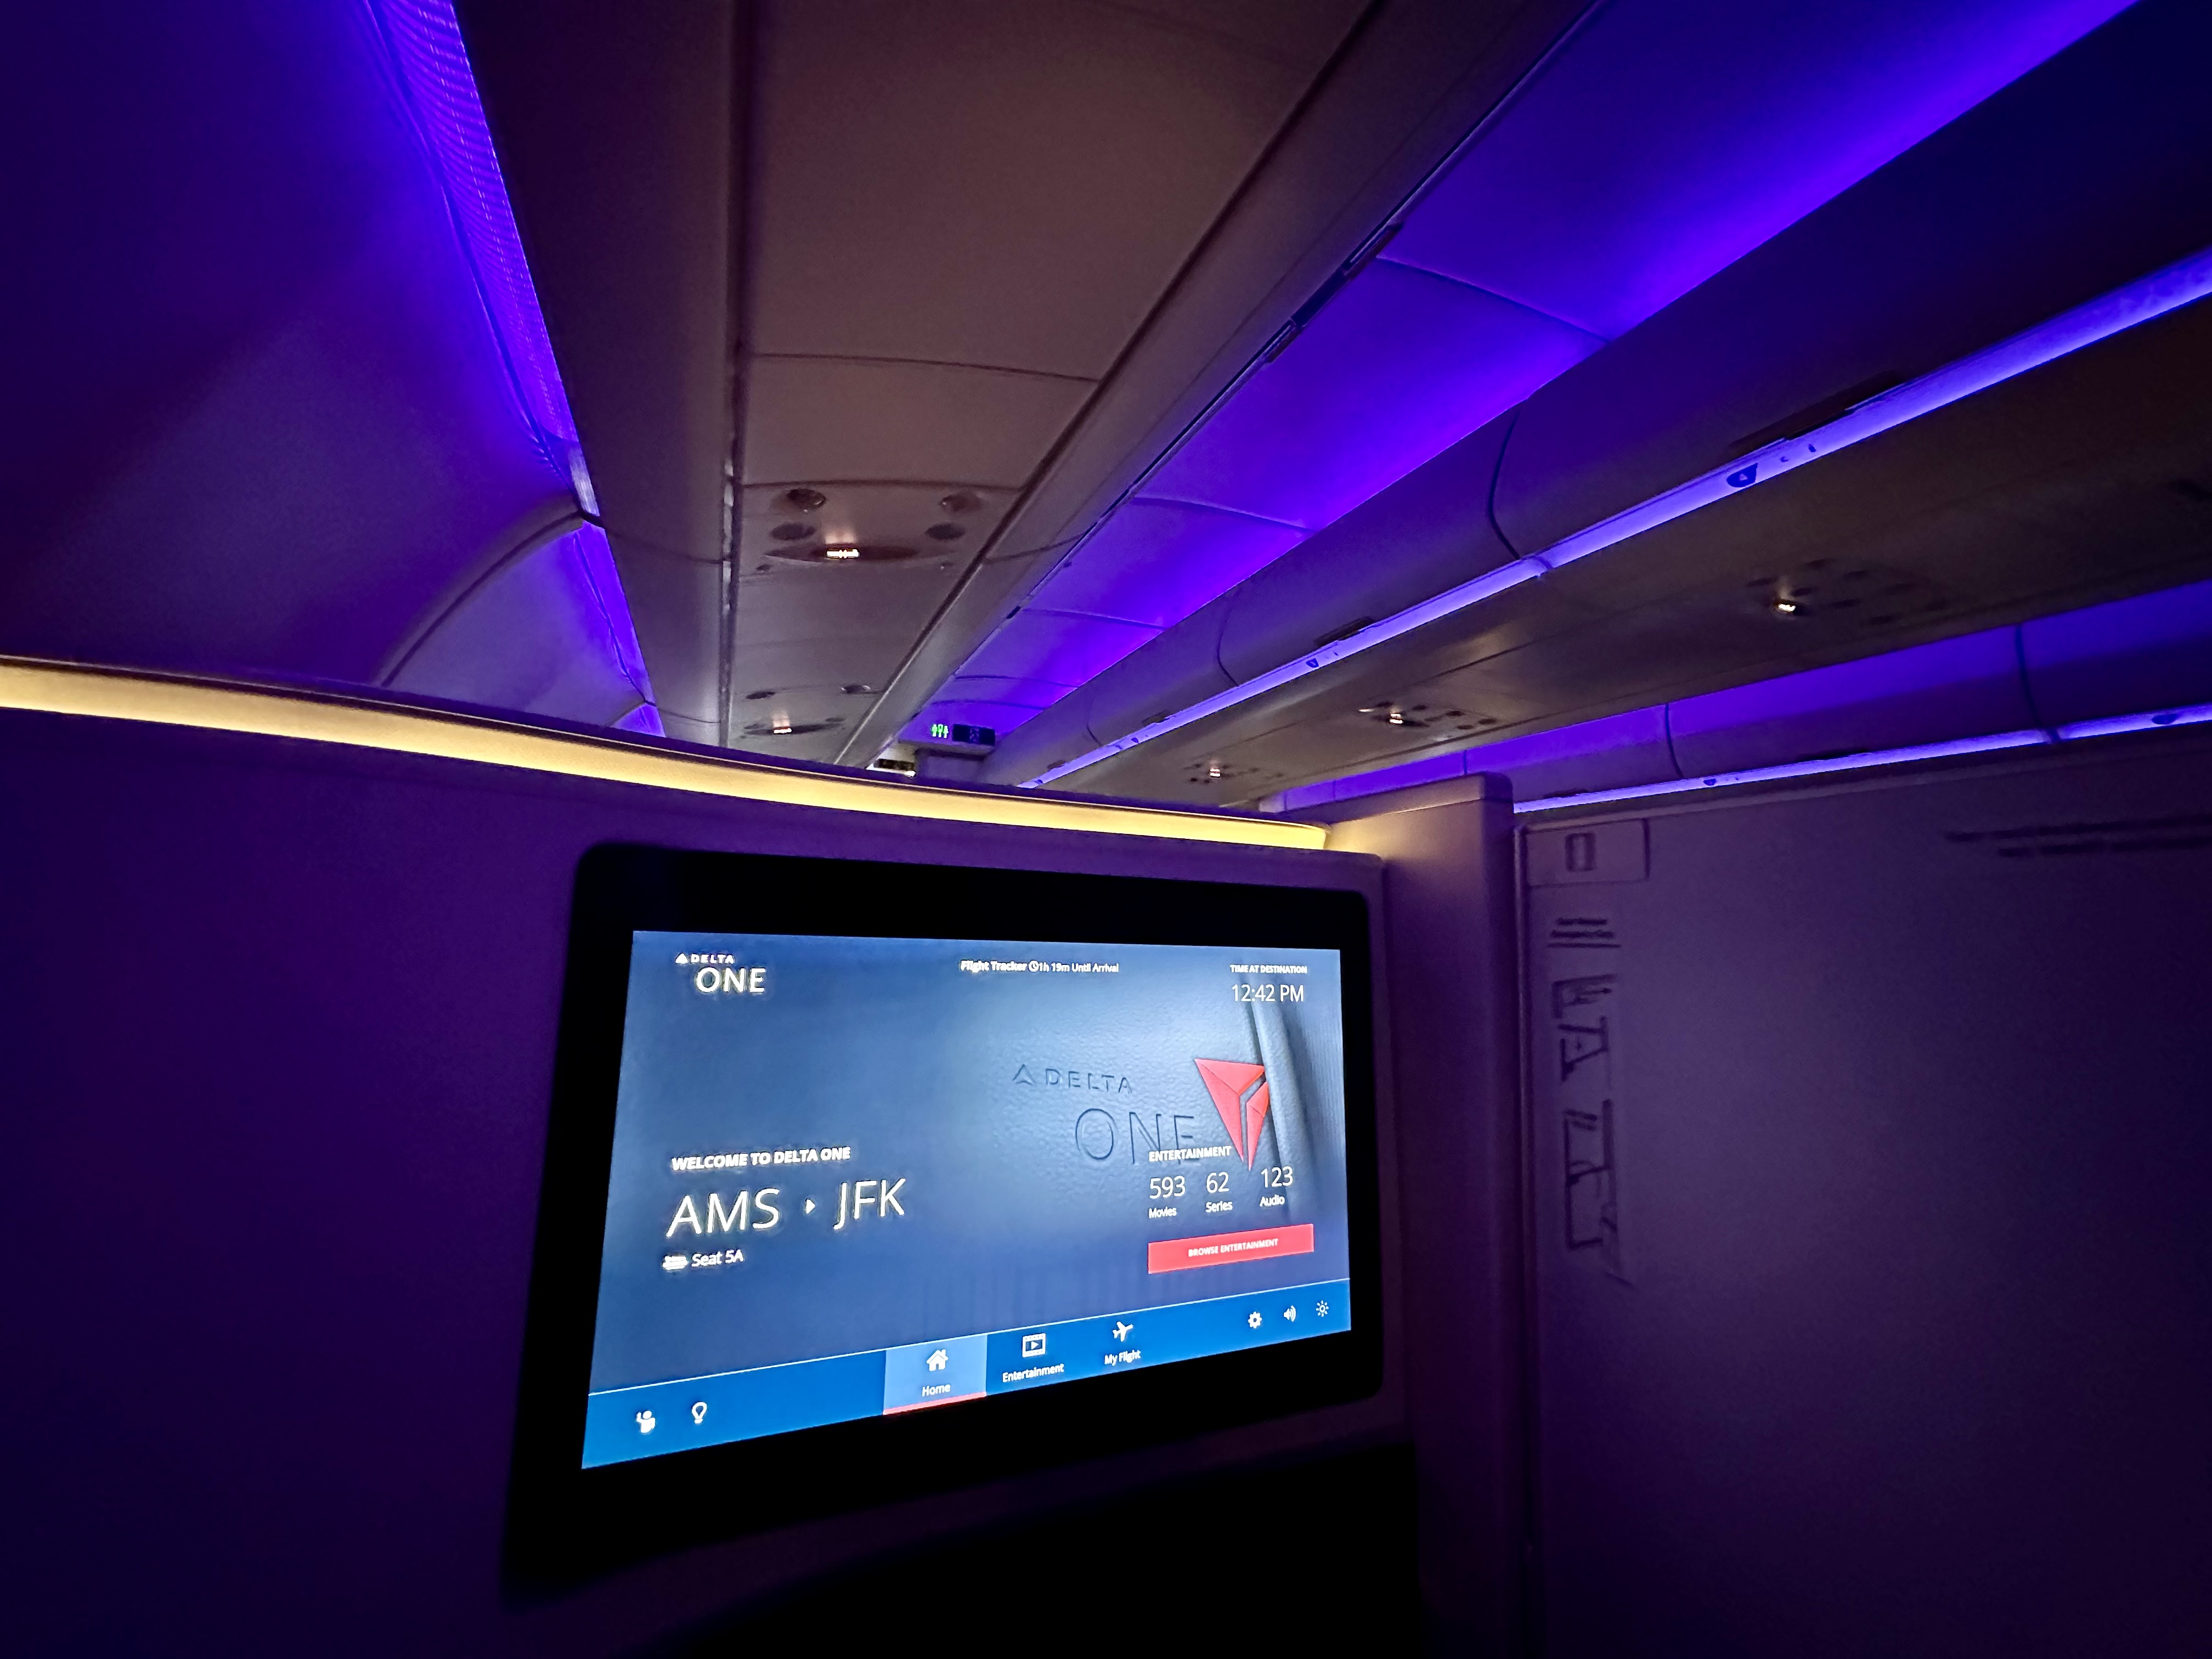 Delta One Suites A330-900neo